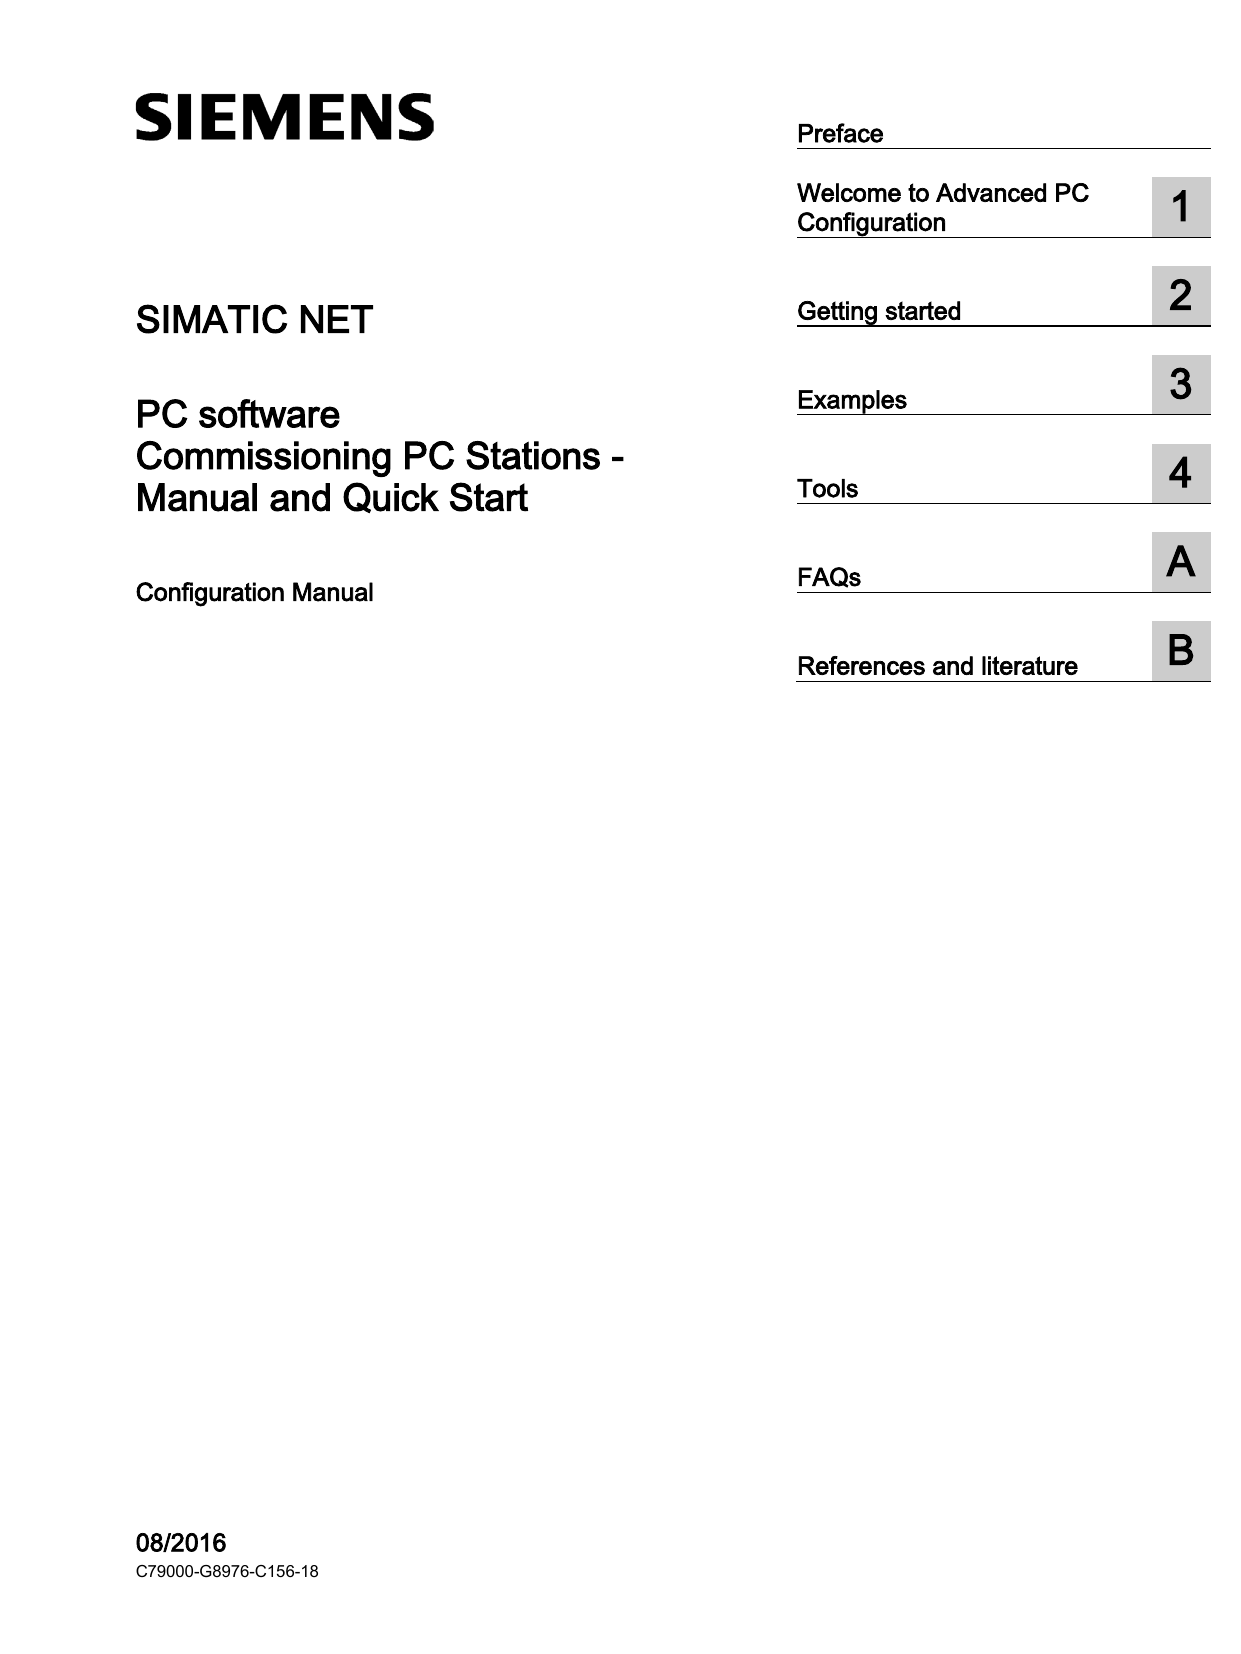 siemens opc scout v10 download free